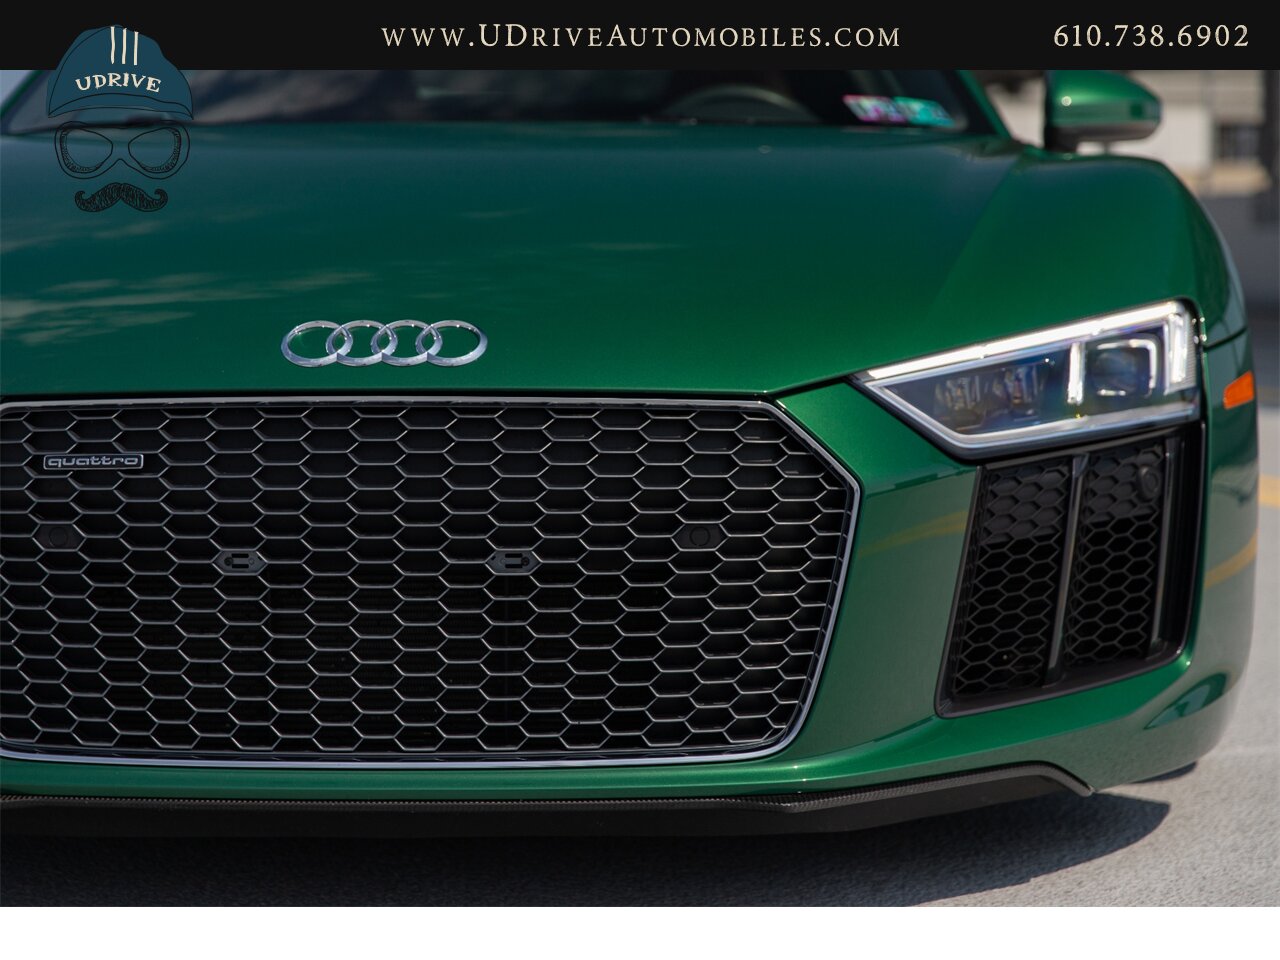 2017 Audi R8 Audi Exclusive Avocado Green Vermont Brown Leather  Diamond Stitching V10 Carbon Fiber - Photo 13 - West Chester, PA 19382